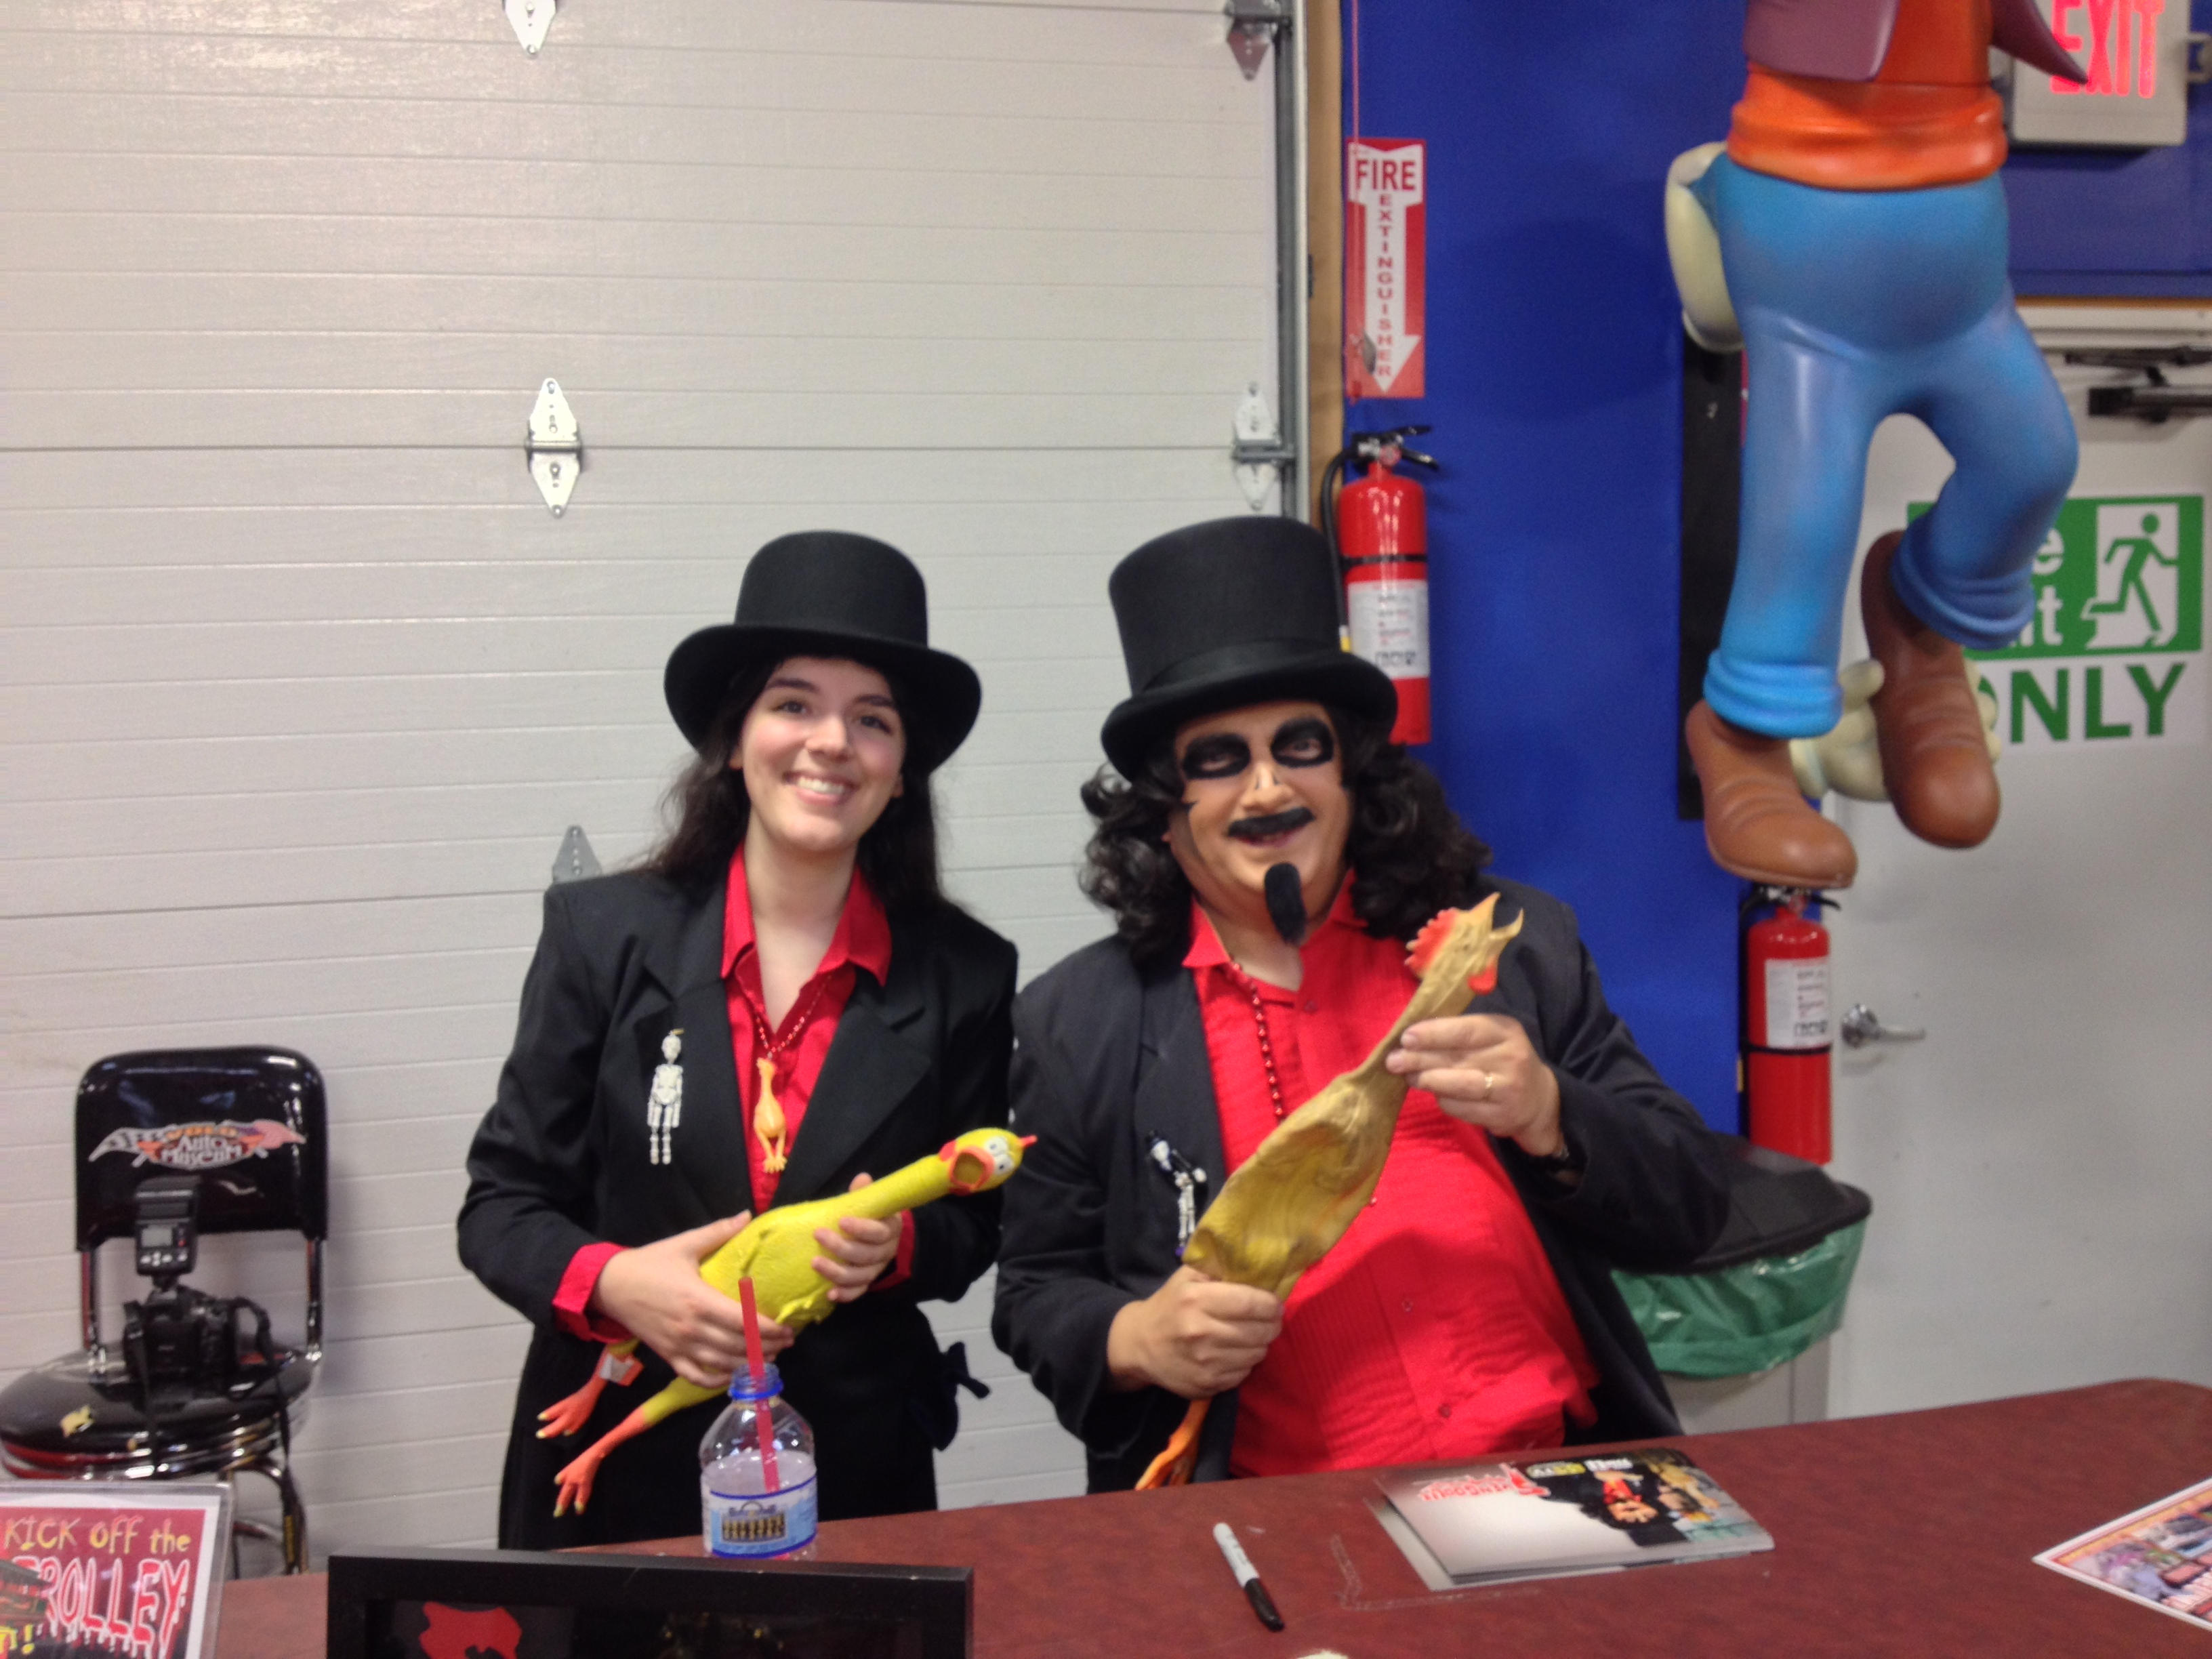 Yes, I met Svengoolie again! (And I dressed up for the occasion, too!)